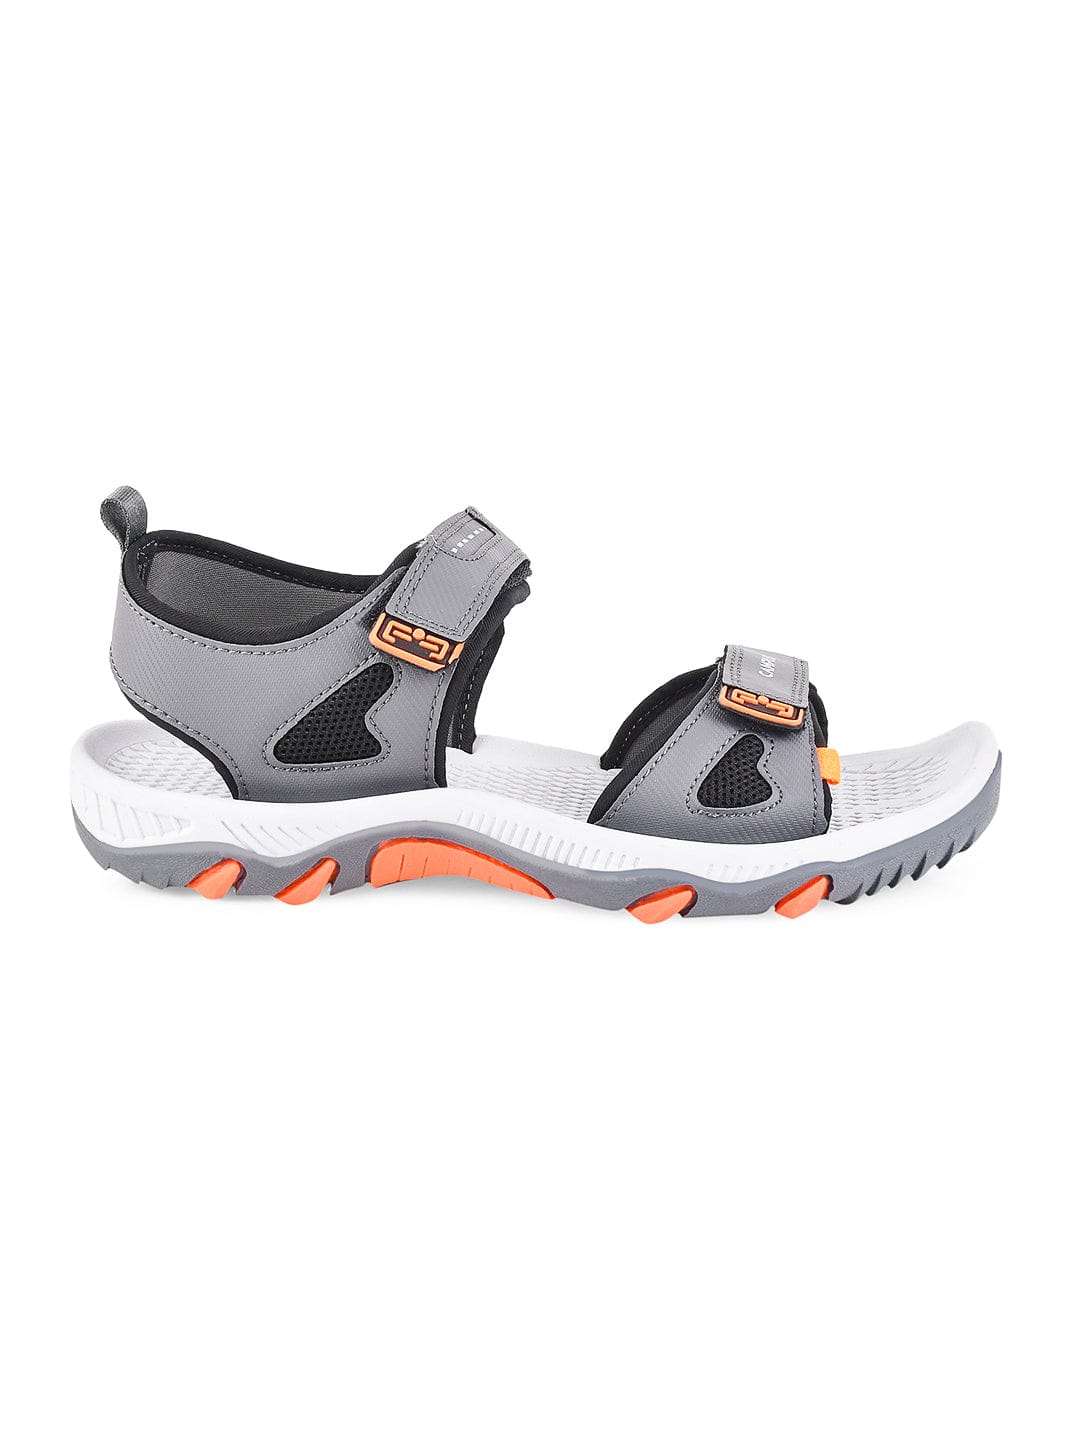 Buy Sandals For Men: Gc-2201-Gry-Org | Campus Shoes